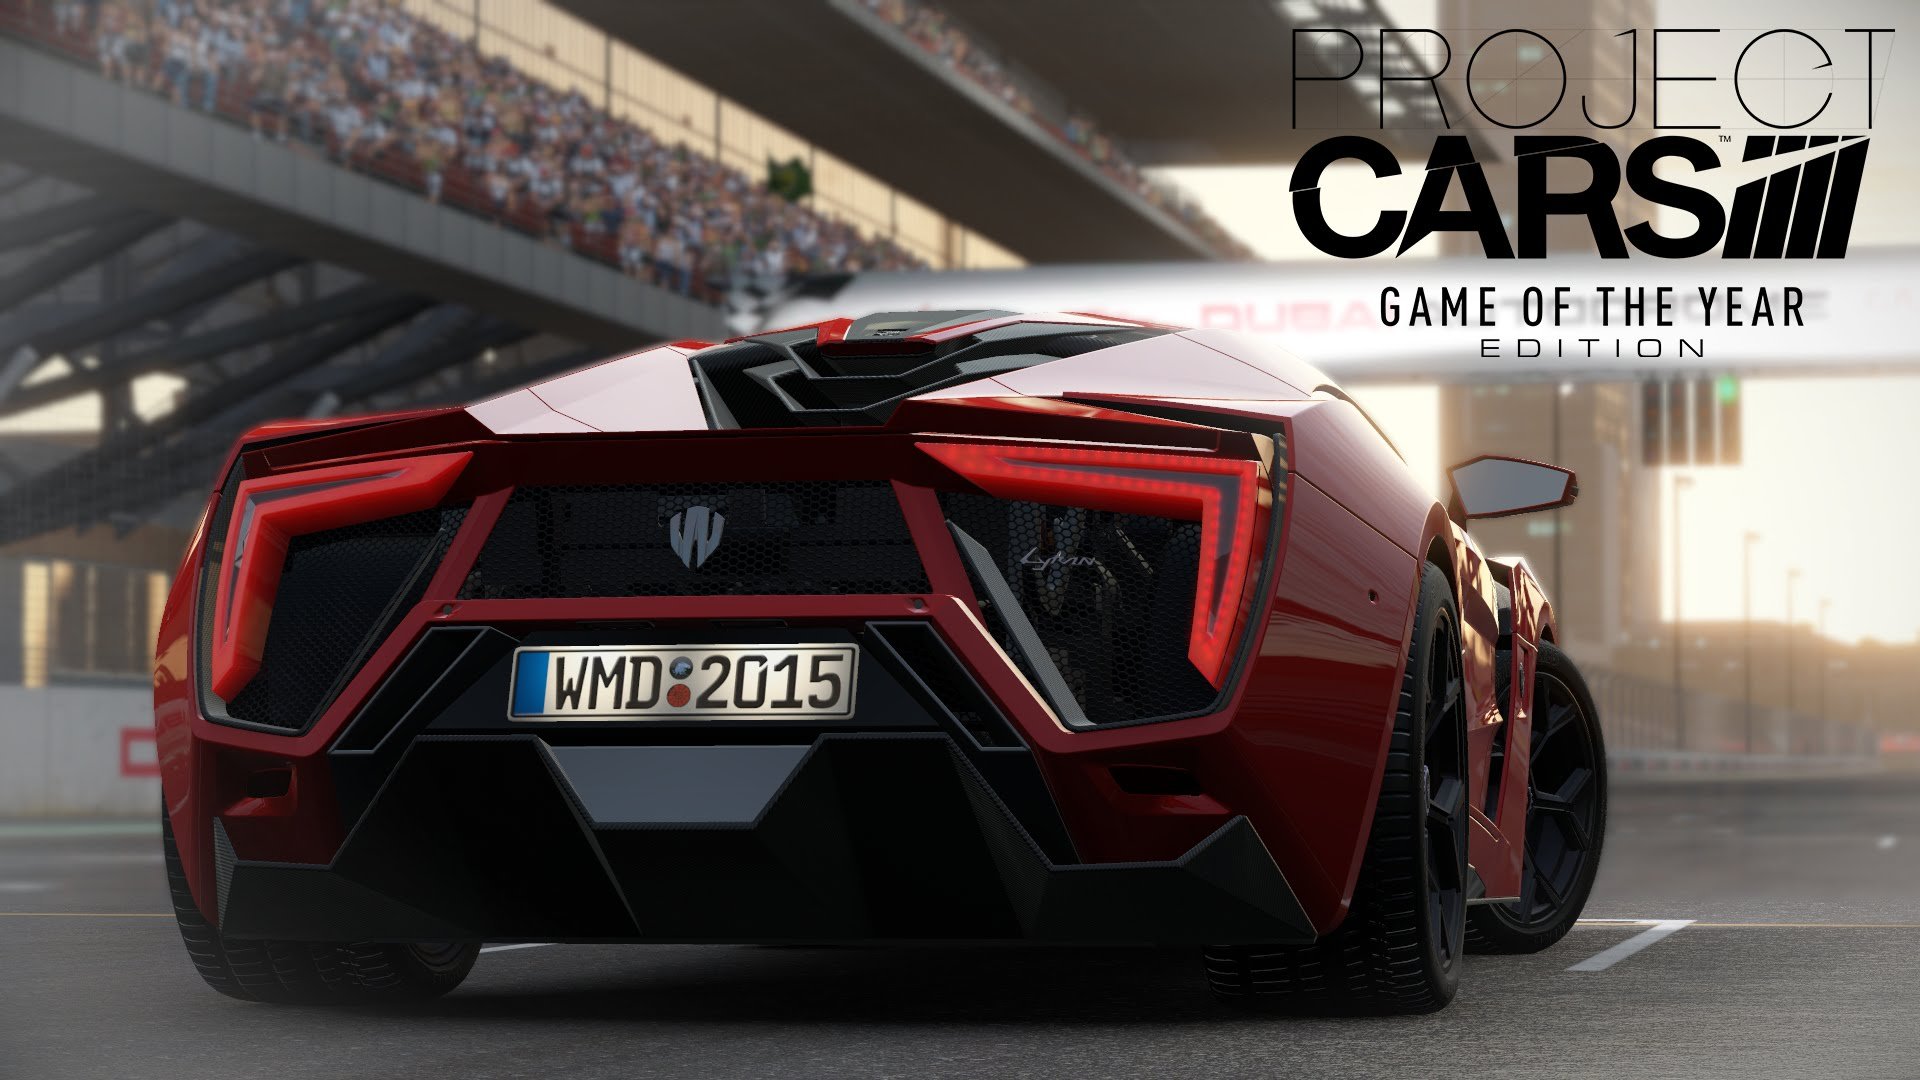 PRoject cars game of the year edition